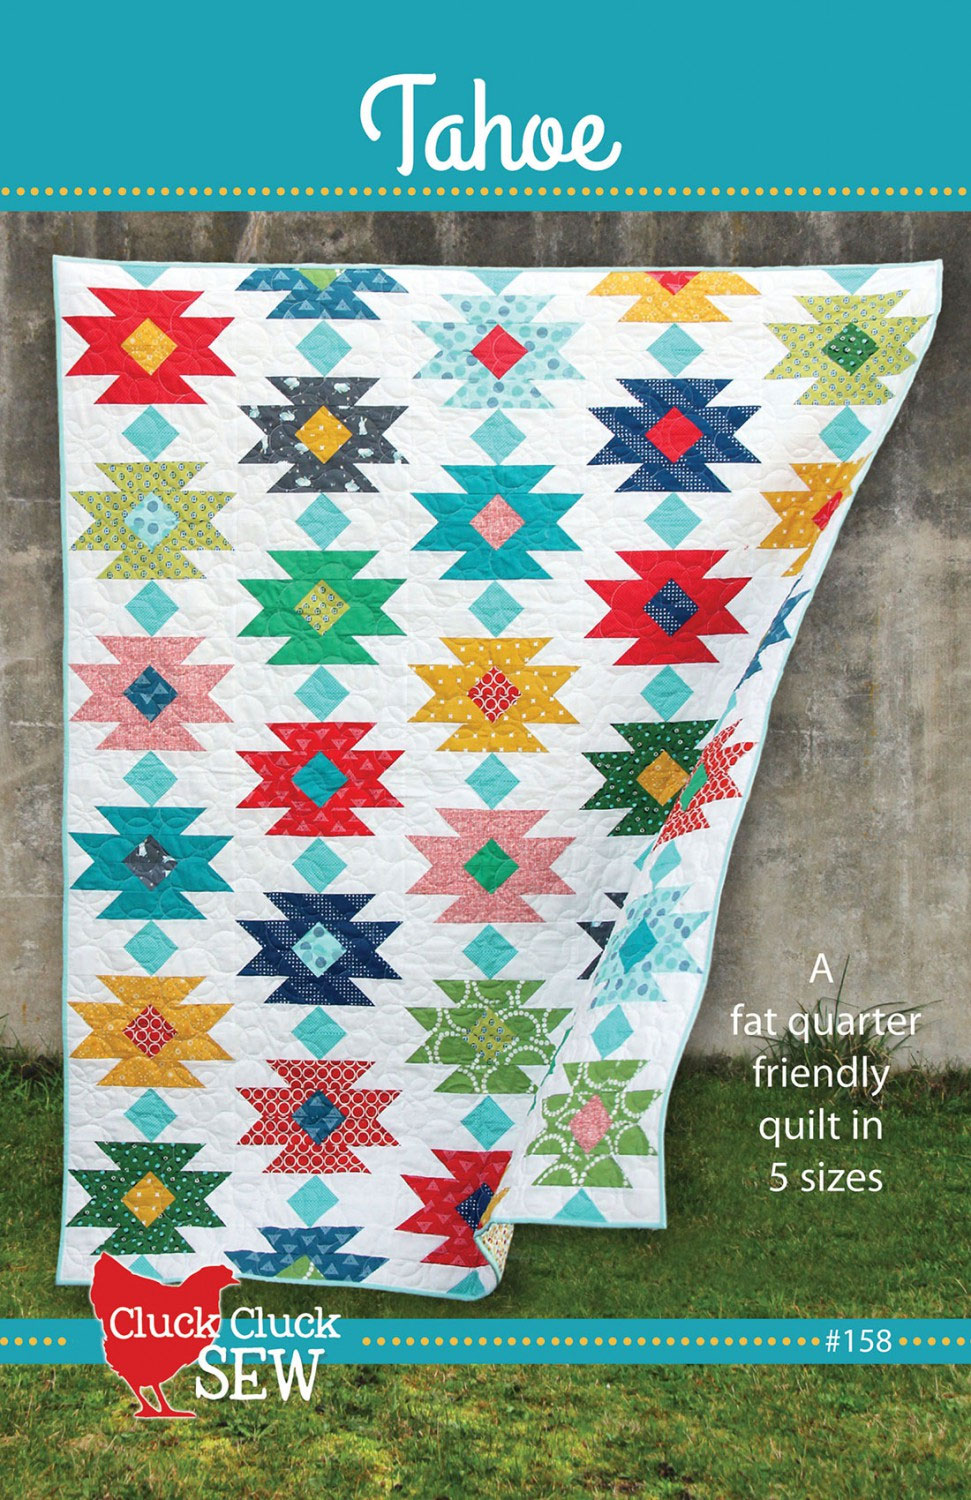 Tahoe-quilt-sewing-pattern-Cluck-Cluck-Sew-front